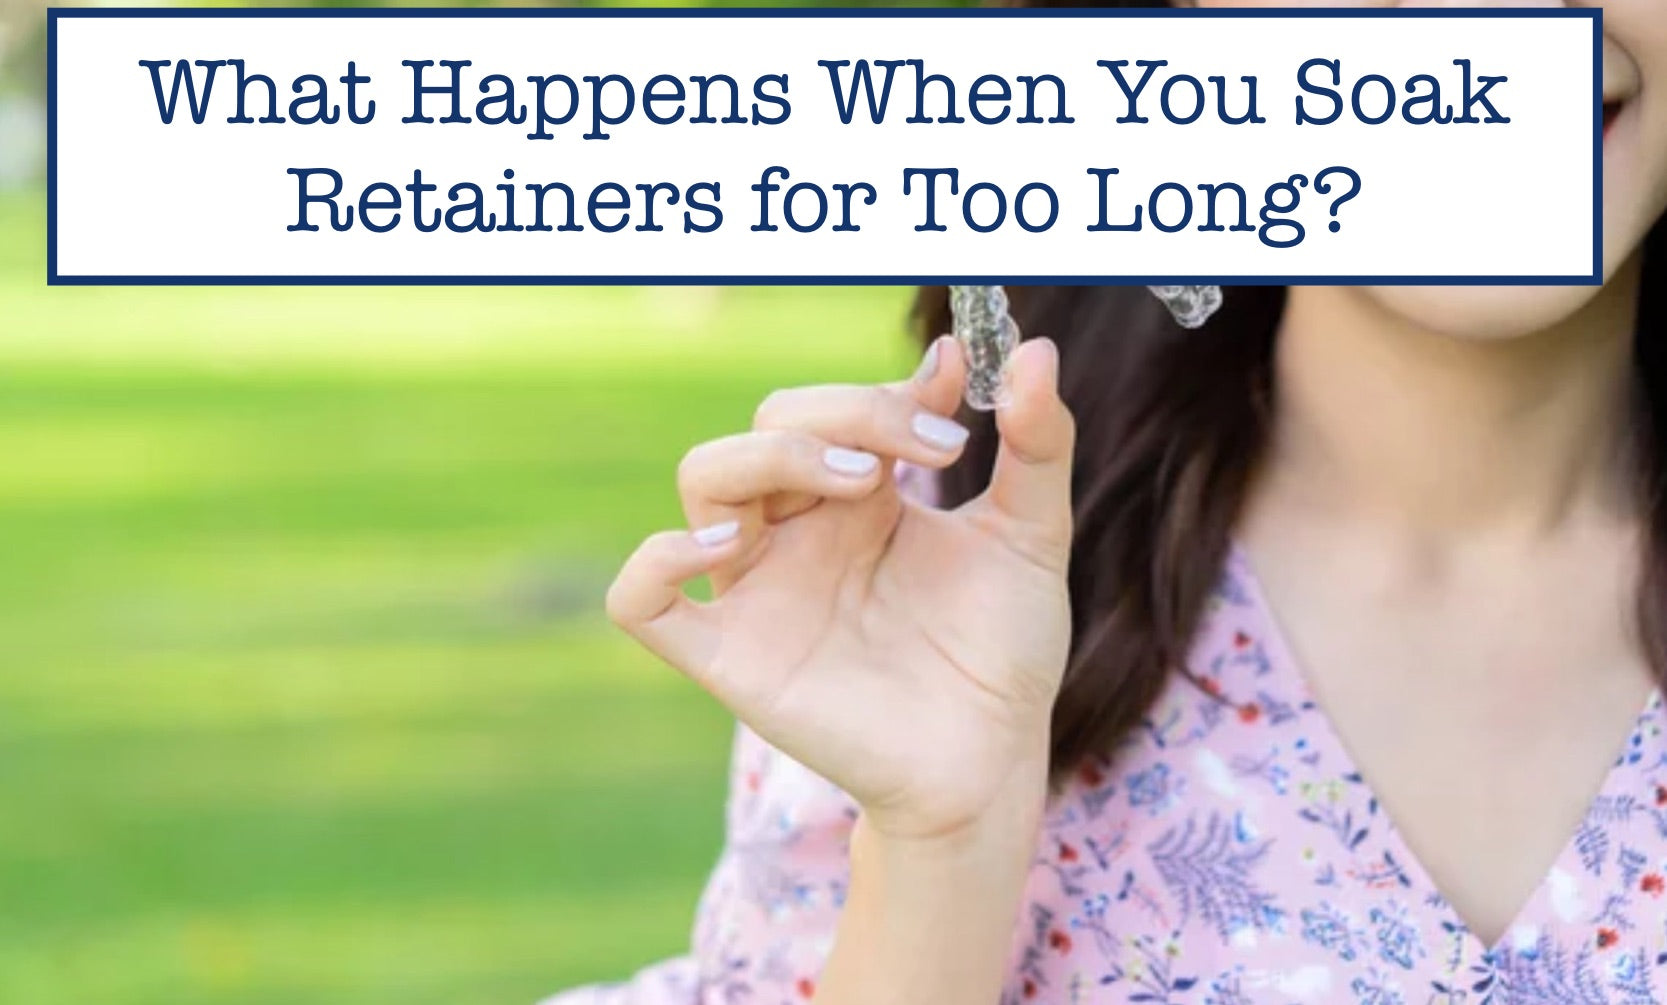 What Happens When You Soak Retainers for Too Long?